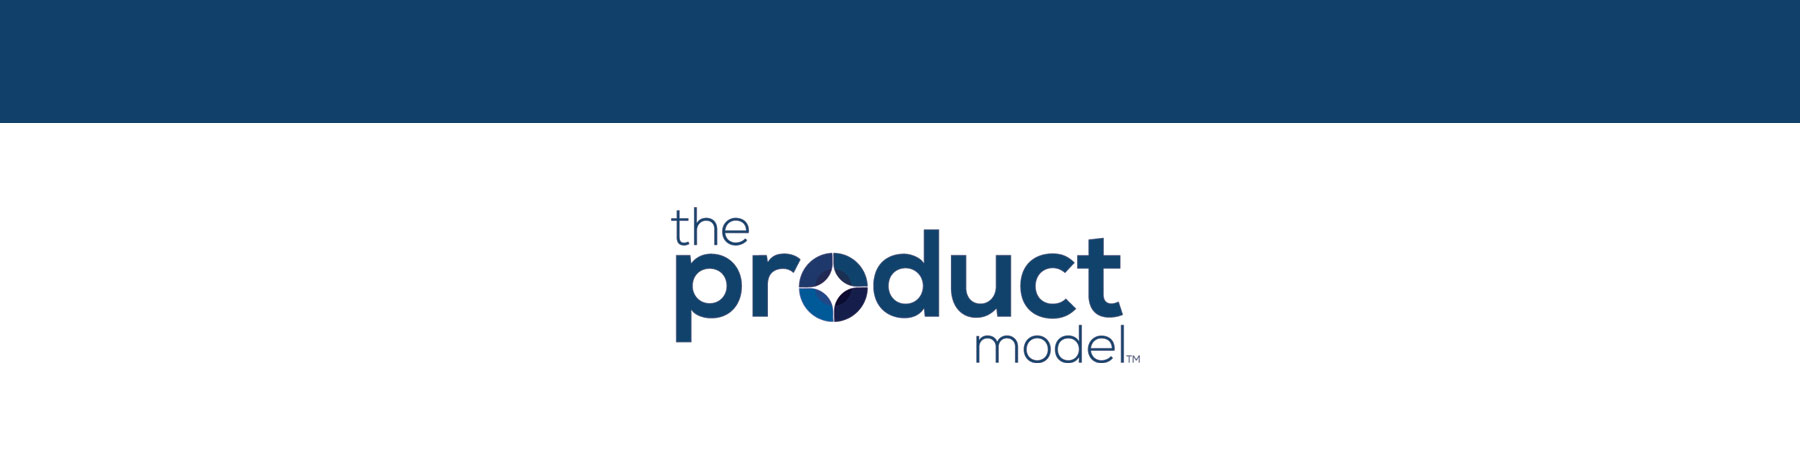 The Product Model